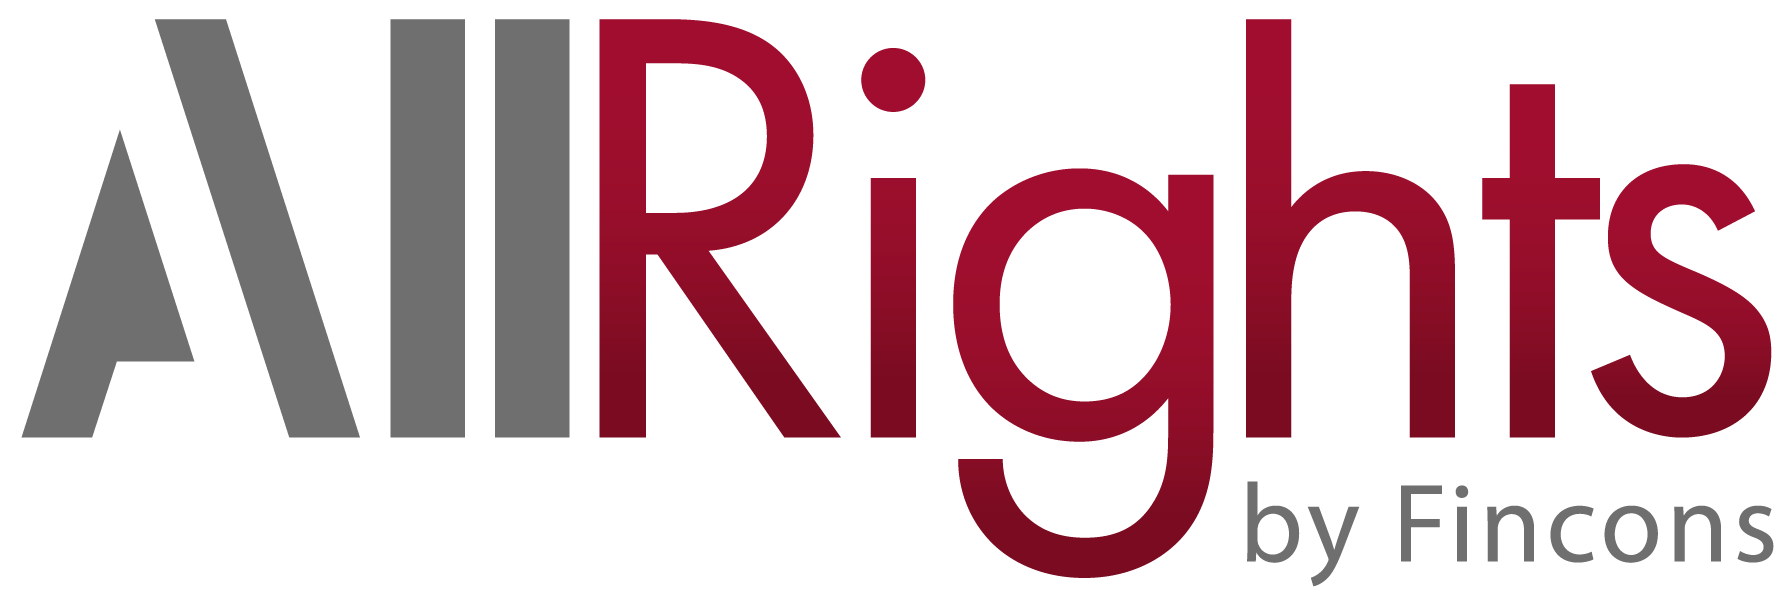 Allrights – Fincons Group